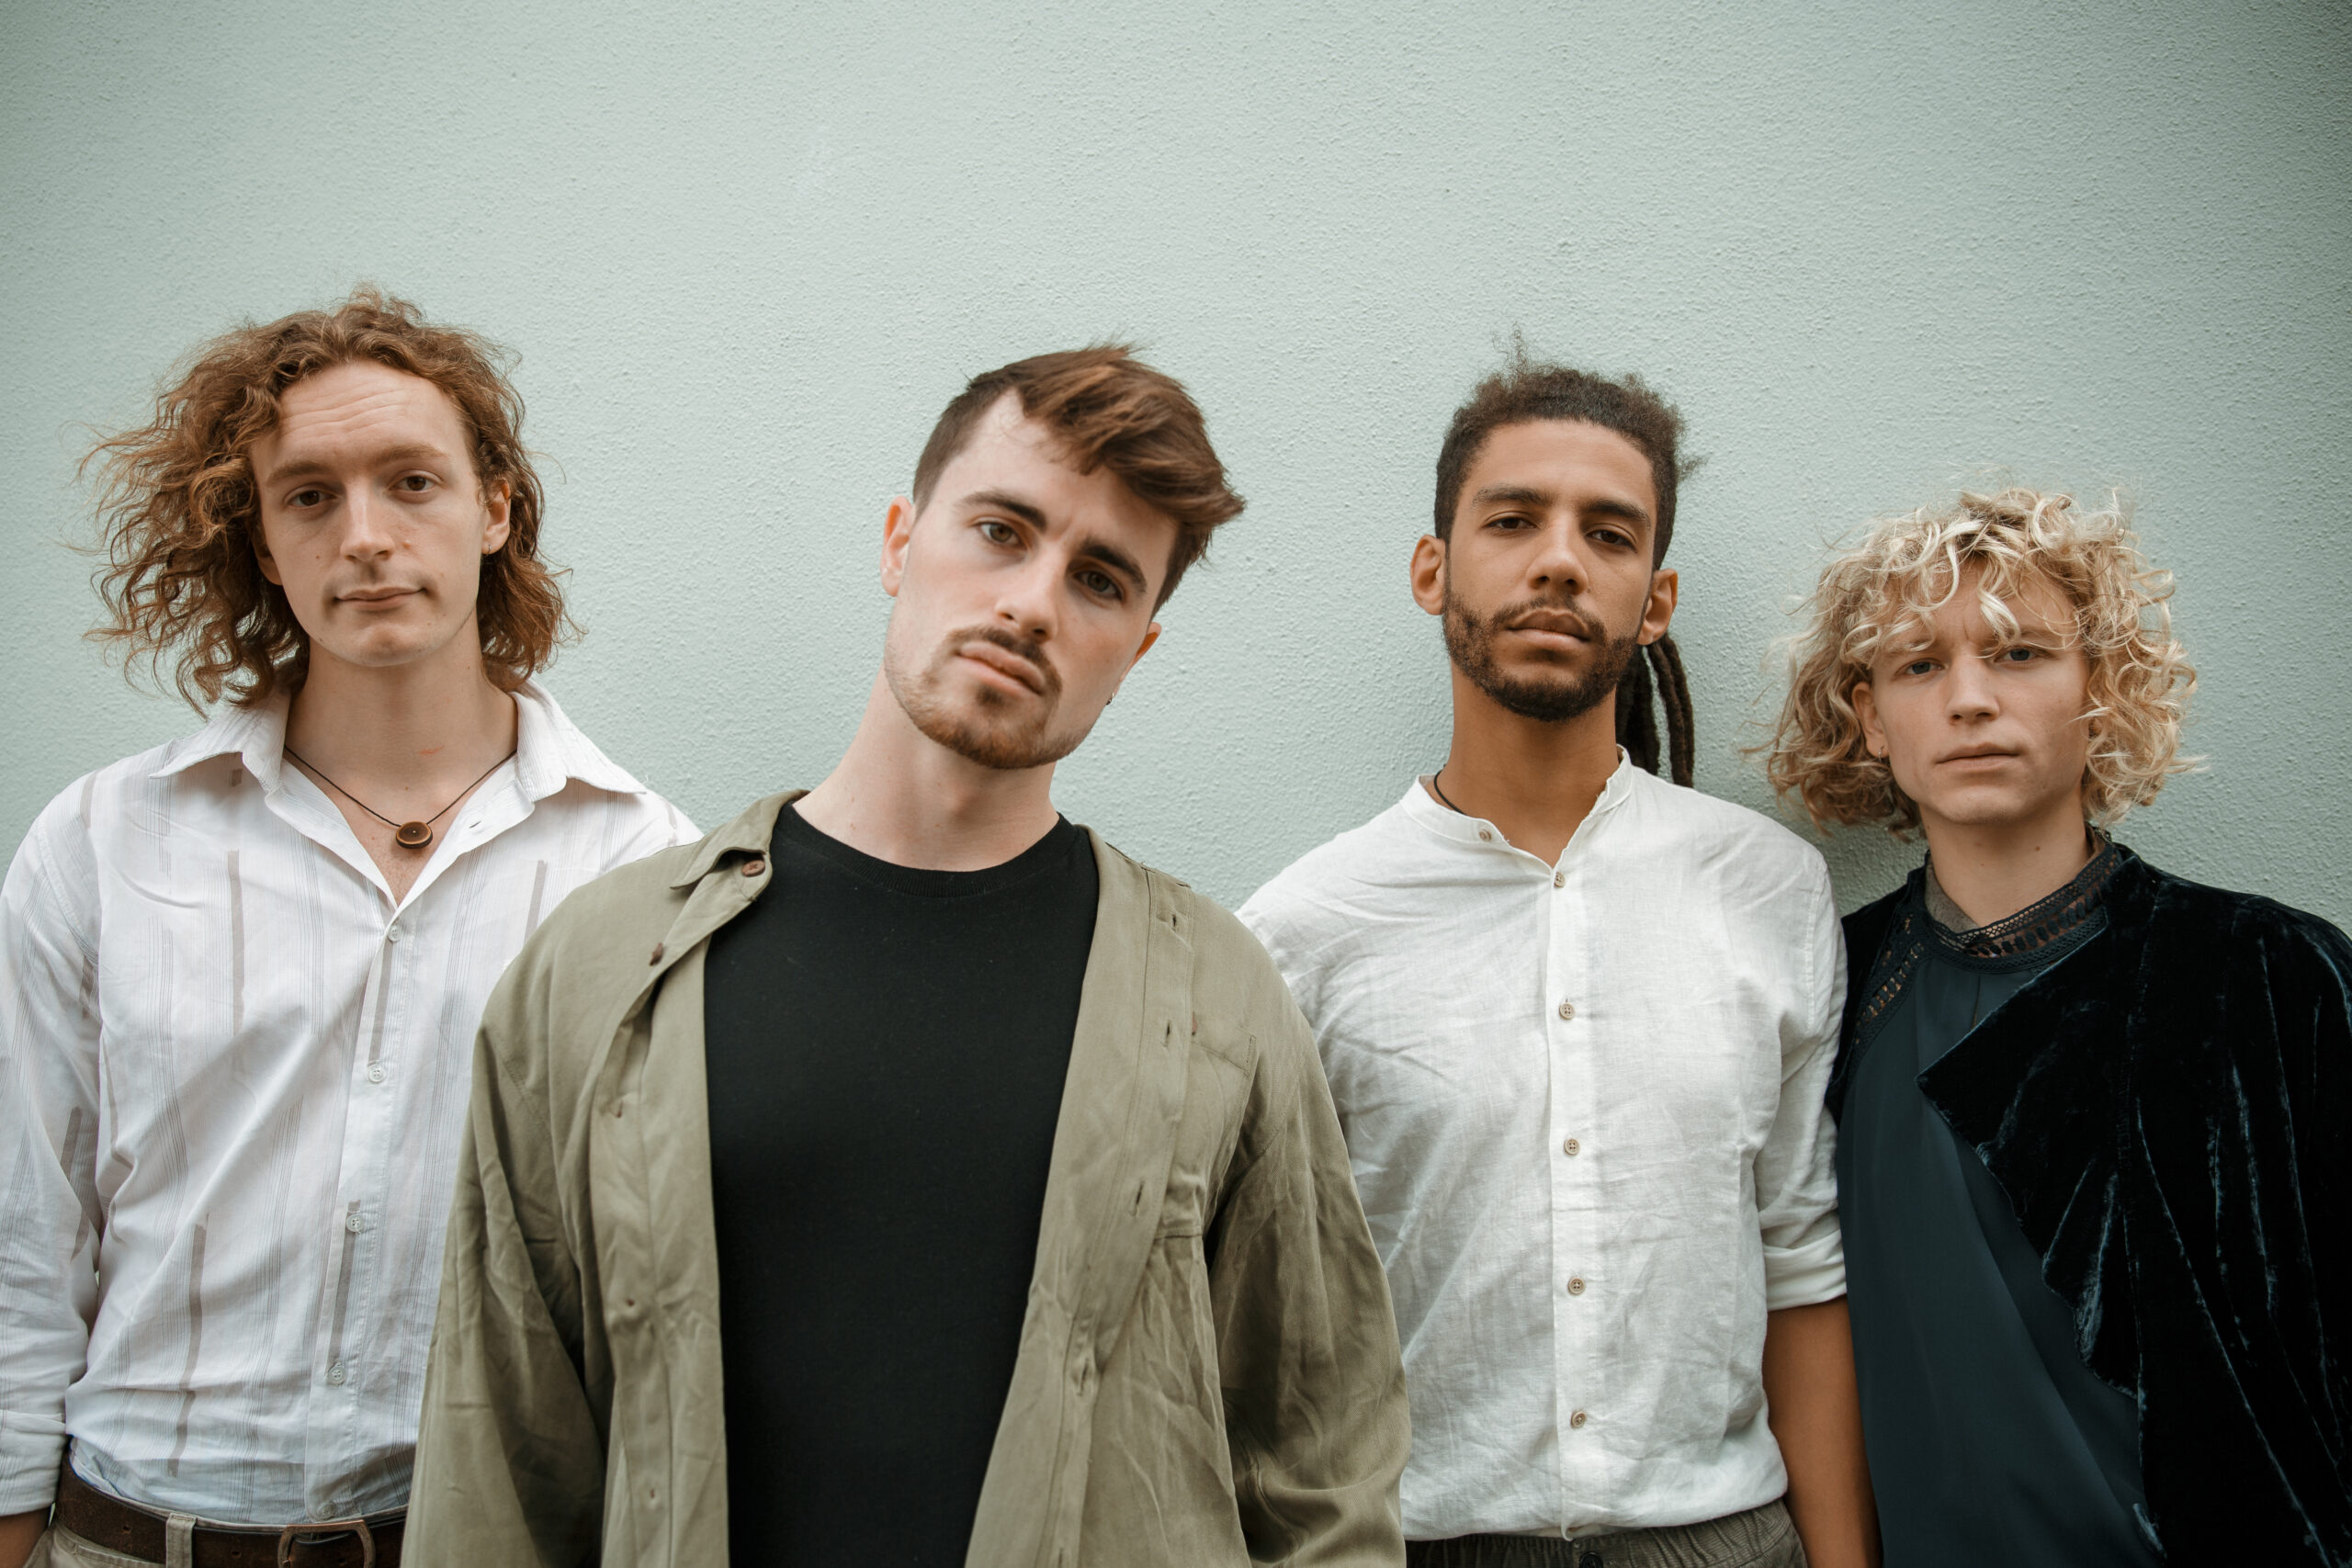 Art Rockers Sky Atlas Discuss the Rise in the Irish Alternative Music Scene and Their Plans to Make Their Footprint On It